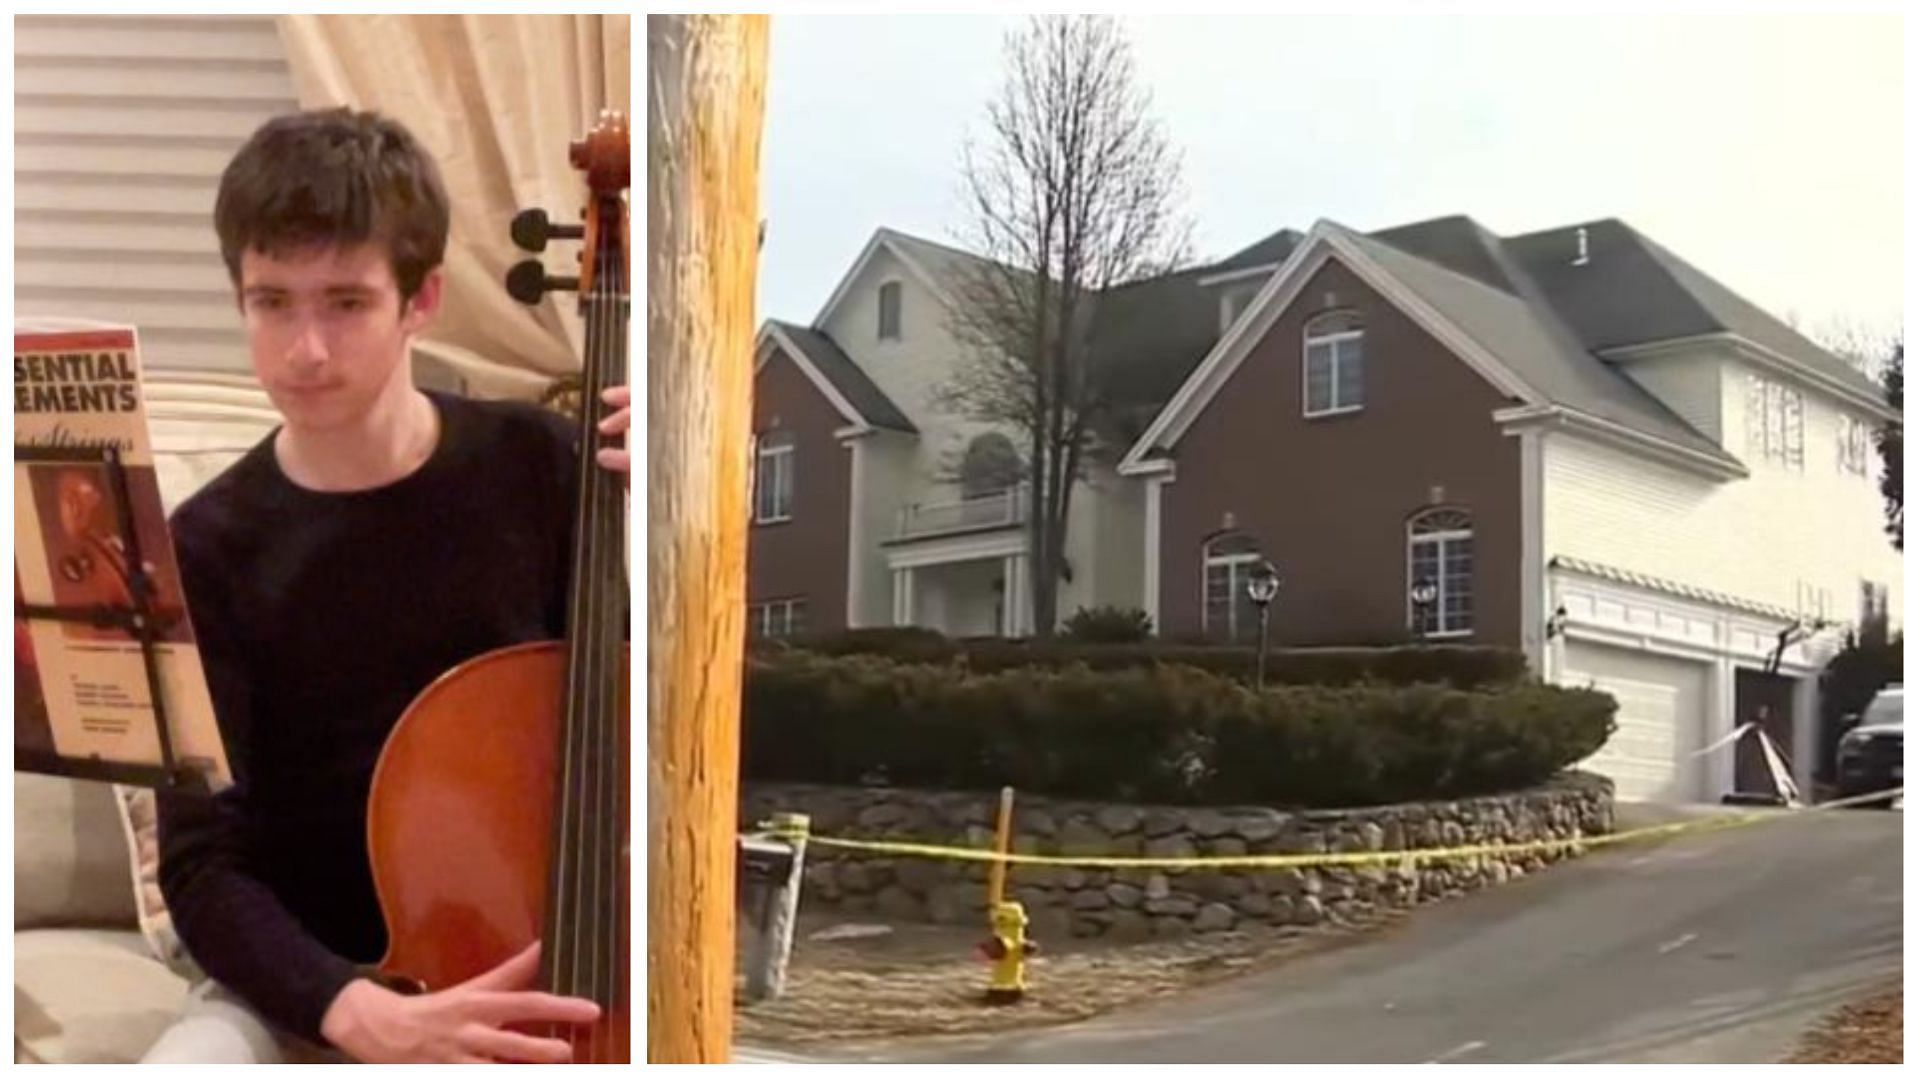 12-year-old Sebastian Robinson (left) and his entire family was killed in an apparent murder-suicide at their residence, (Images via @KristinaRex and WCVB Channel 5 Boston/YouTube)